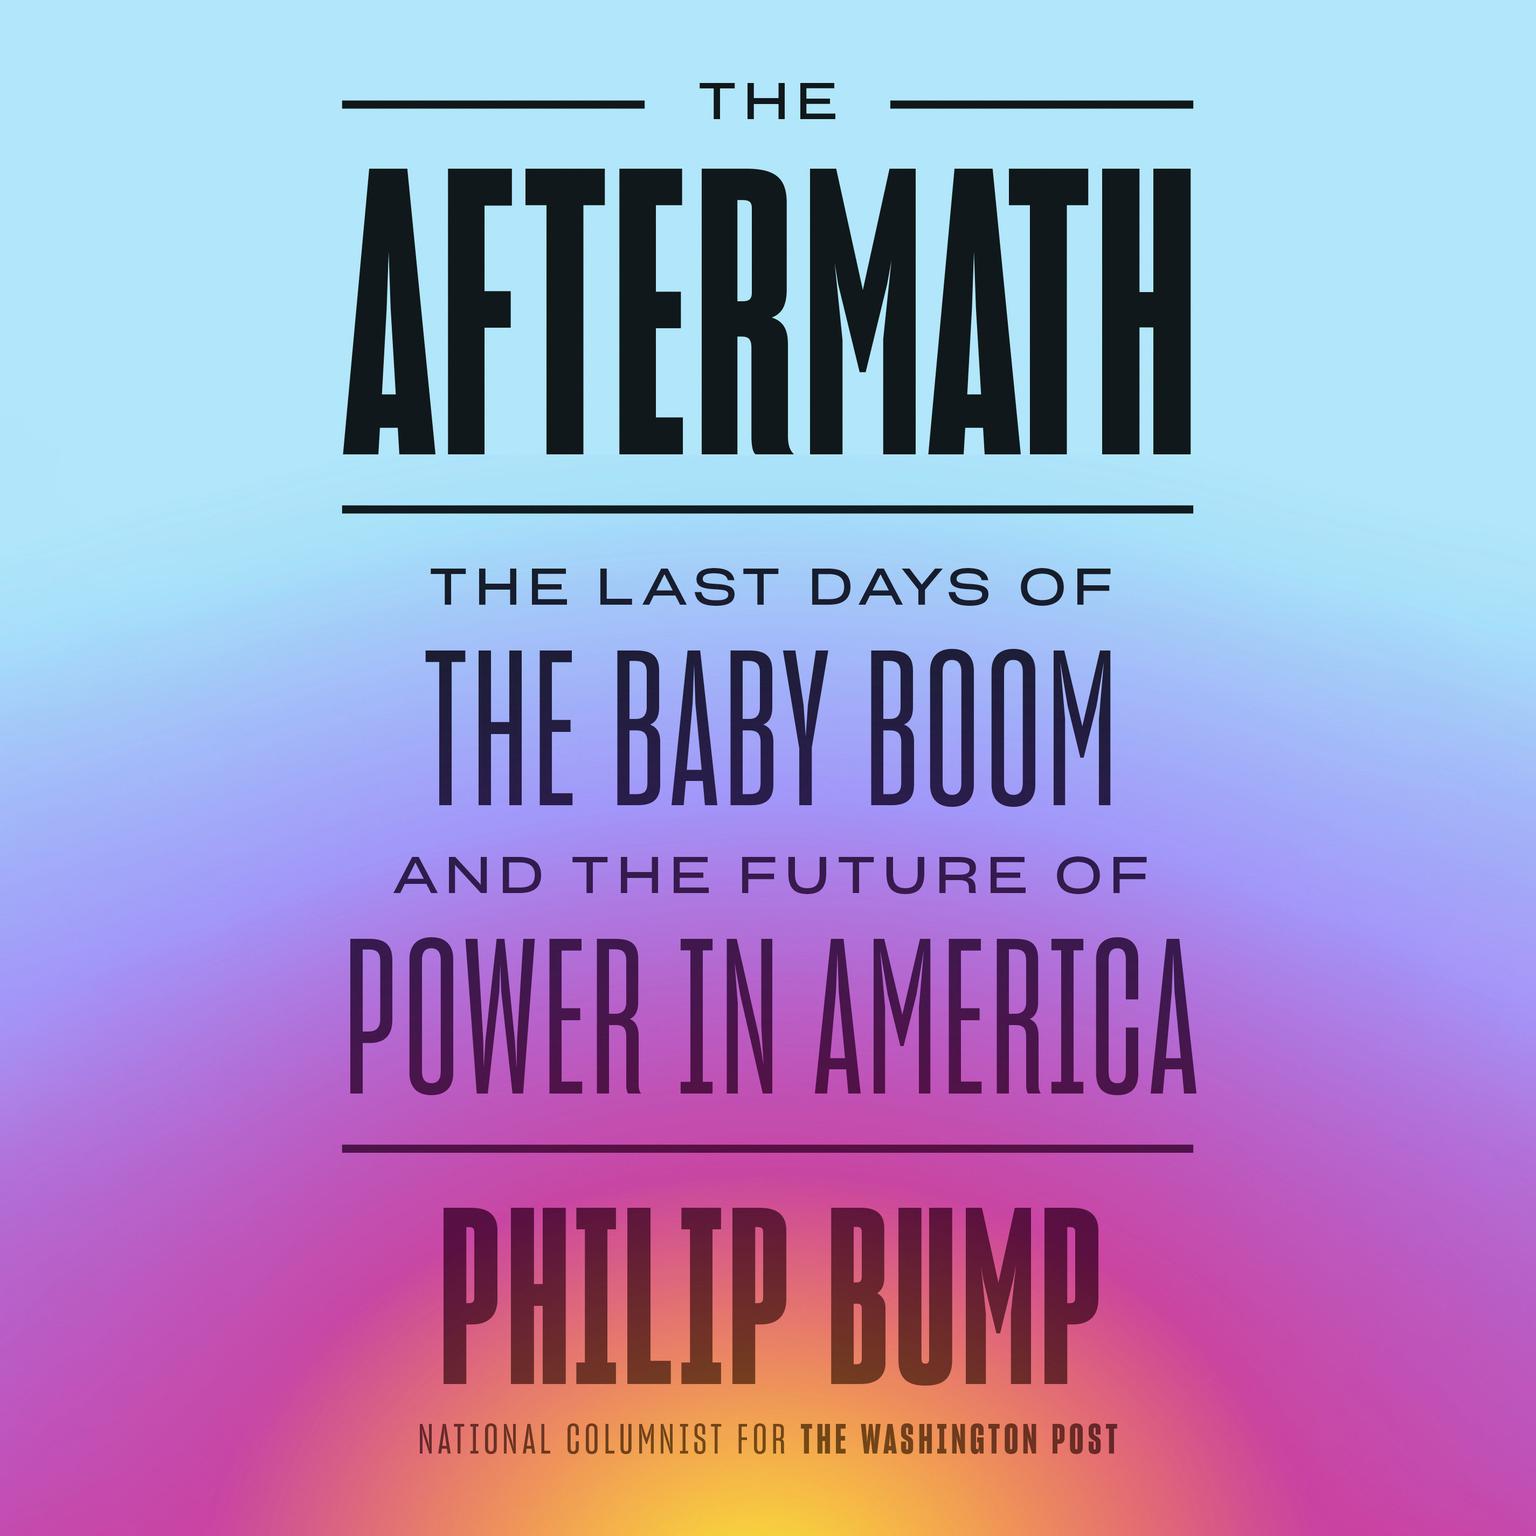 The Aftermath: The Last Days of the Baby Boom and the Future of Power in America Audiobook, by Philip Bump